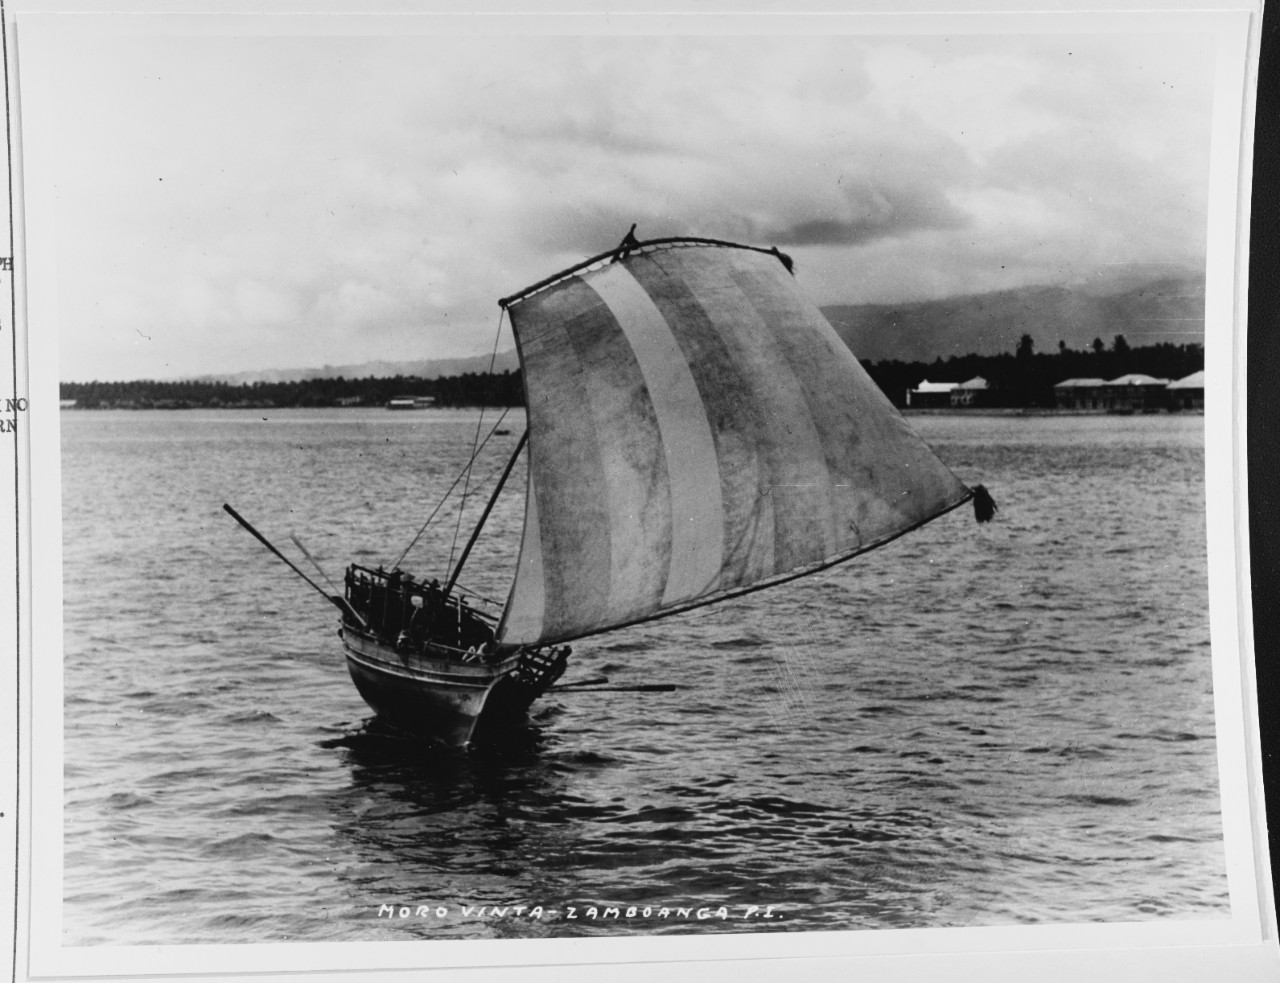 A moro sailing craft at Zamboanga on the Island of Mindanao in the Philippines, 1937.